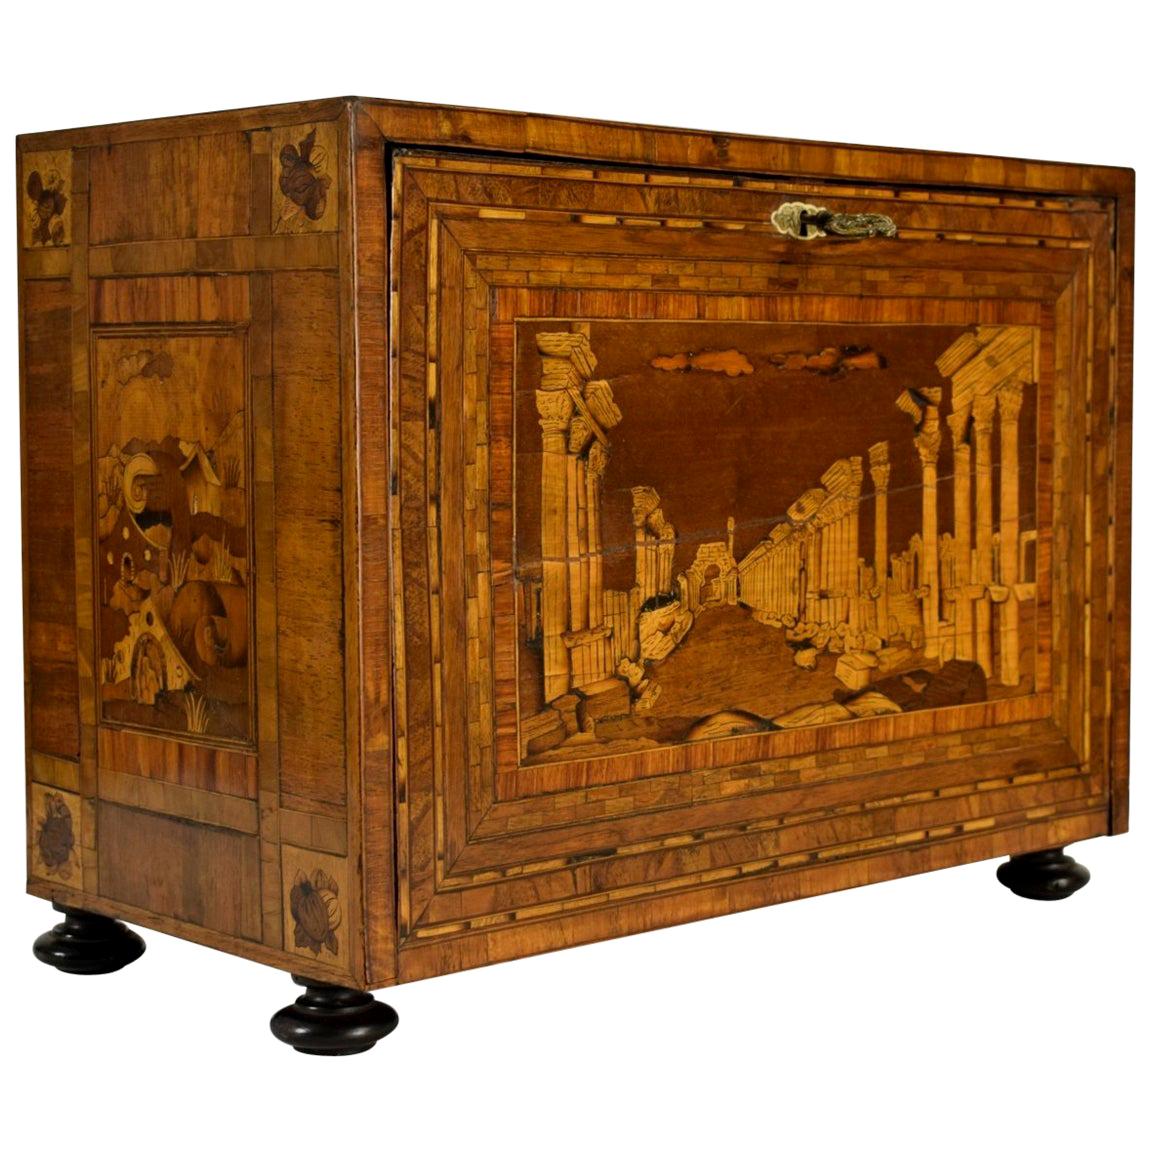  17th Century, German Wood Apothecary Cabinet with Fantasy Architectures For Sale